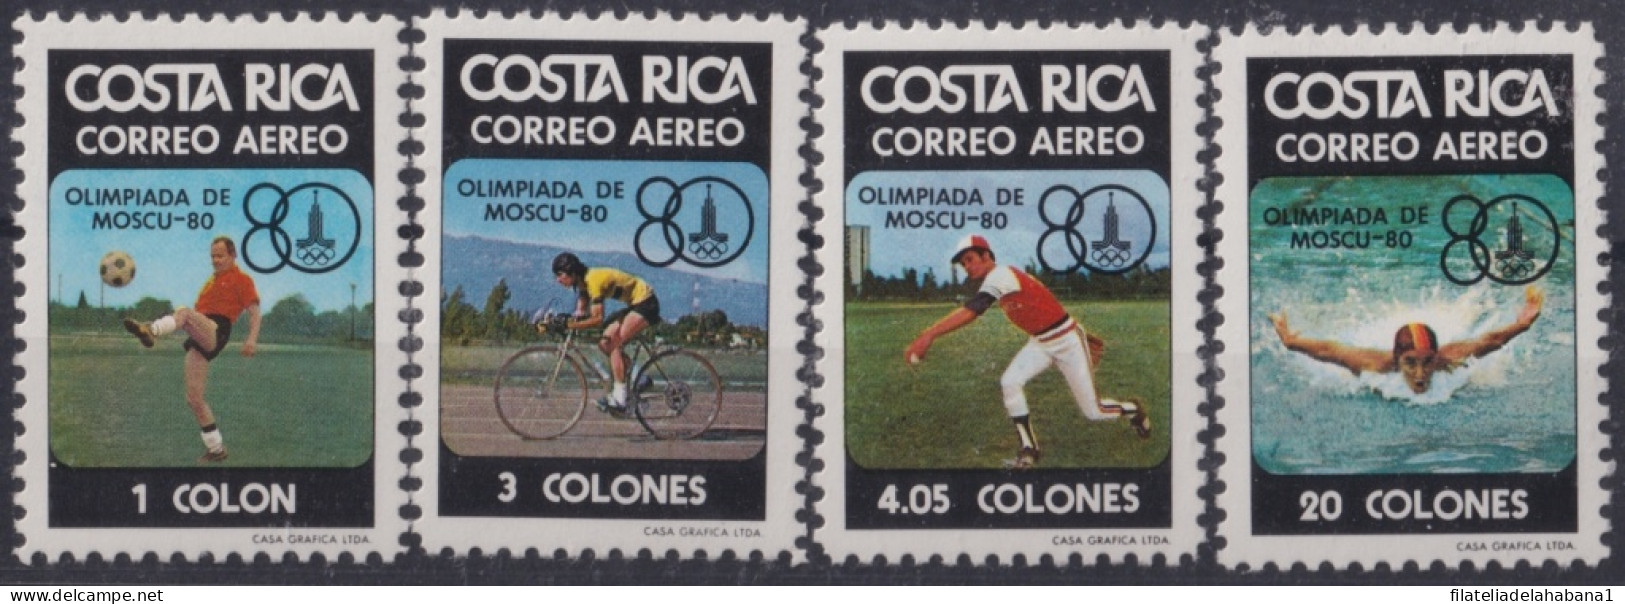 F-EX50099 COSTA RICA MNH 1980 MOSCOW OLYMPIC GAMES CICLING SOCCER BASEBALL.          - Zomer 1980: Moskou